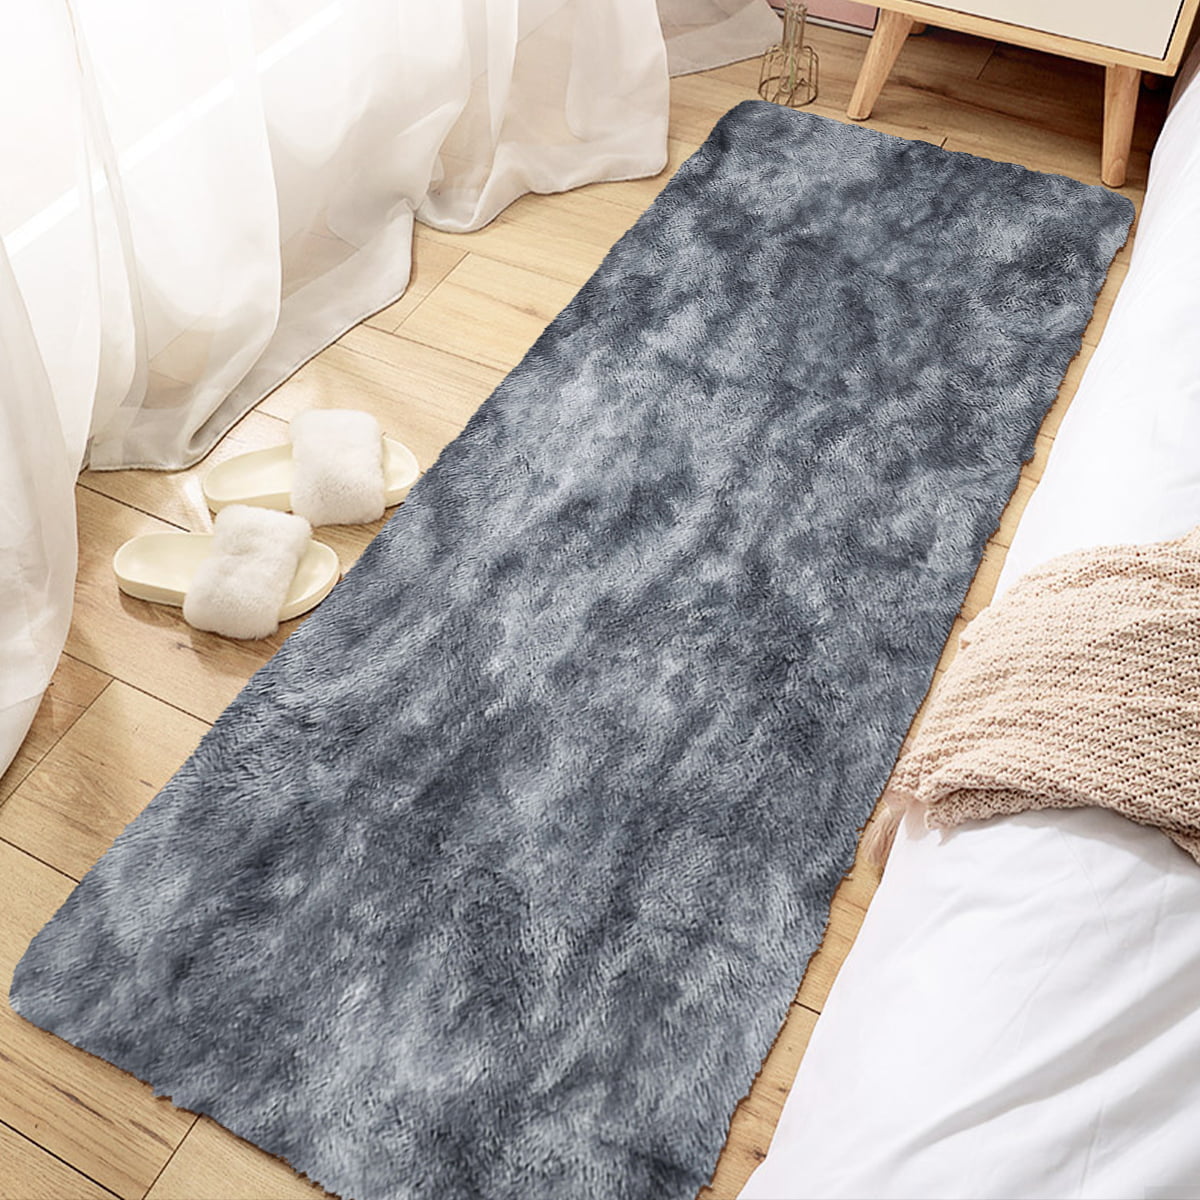 Soft Warming Colourful Shaggy Long Runner Rugs Hallway Home 